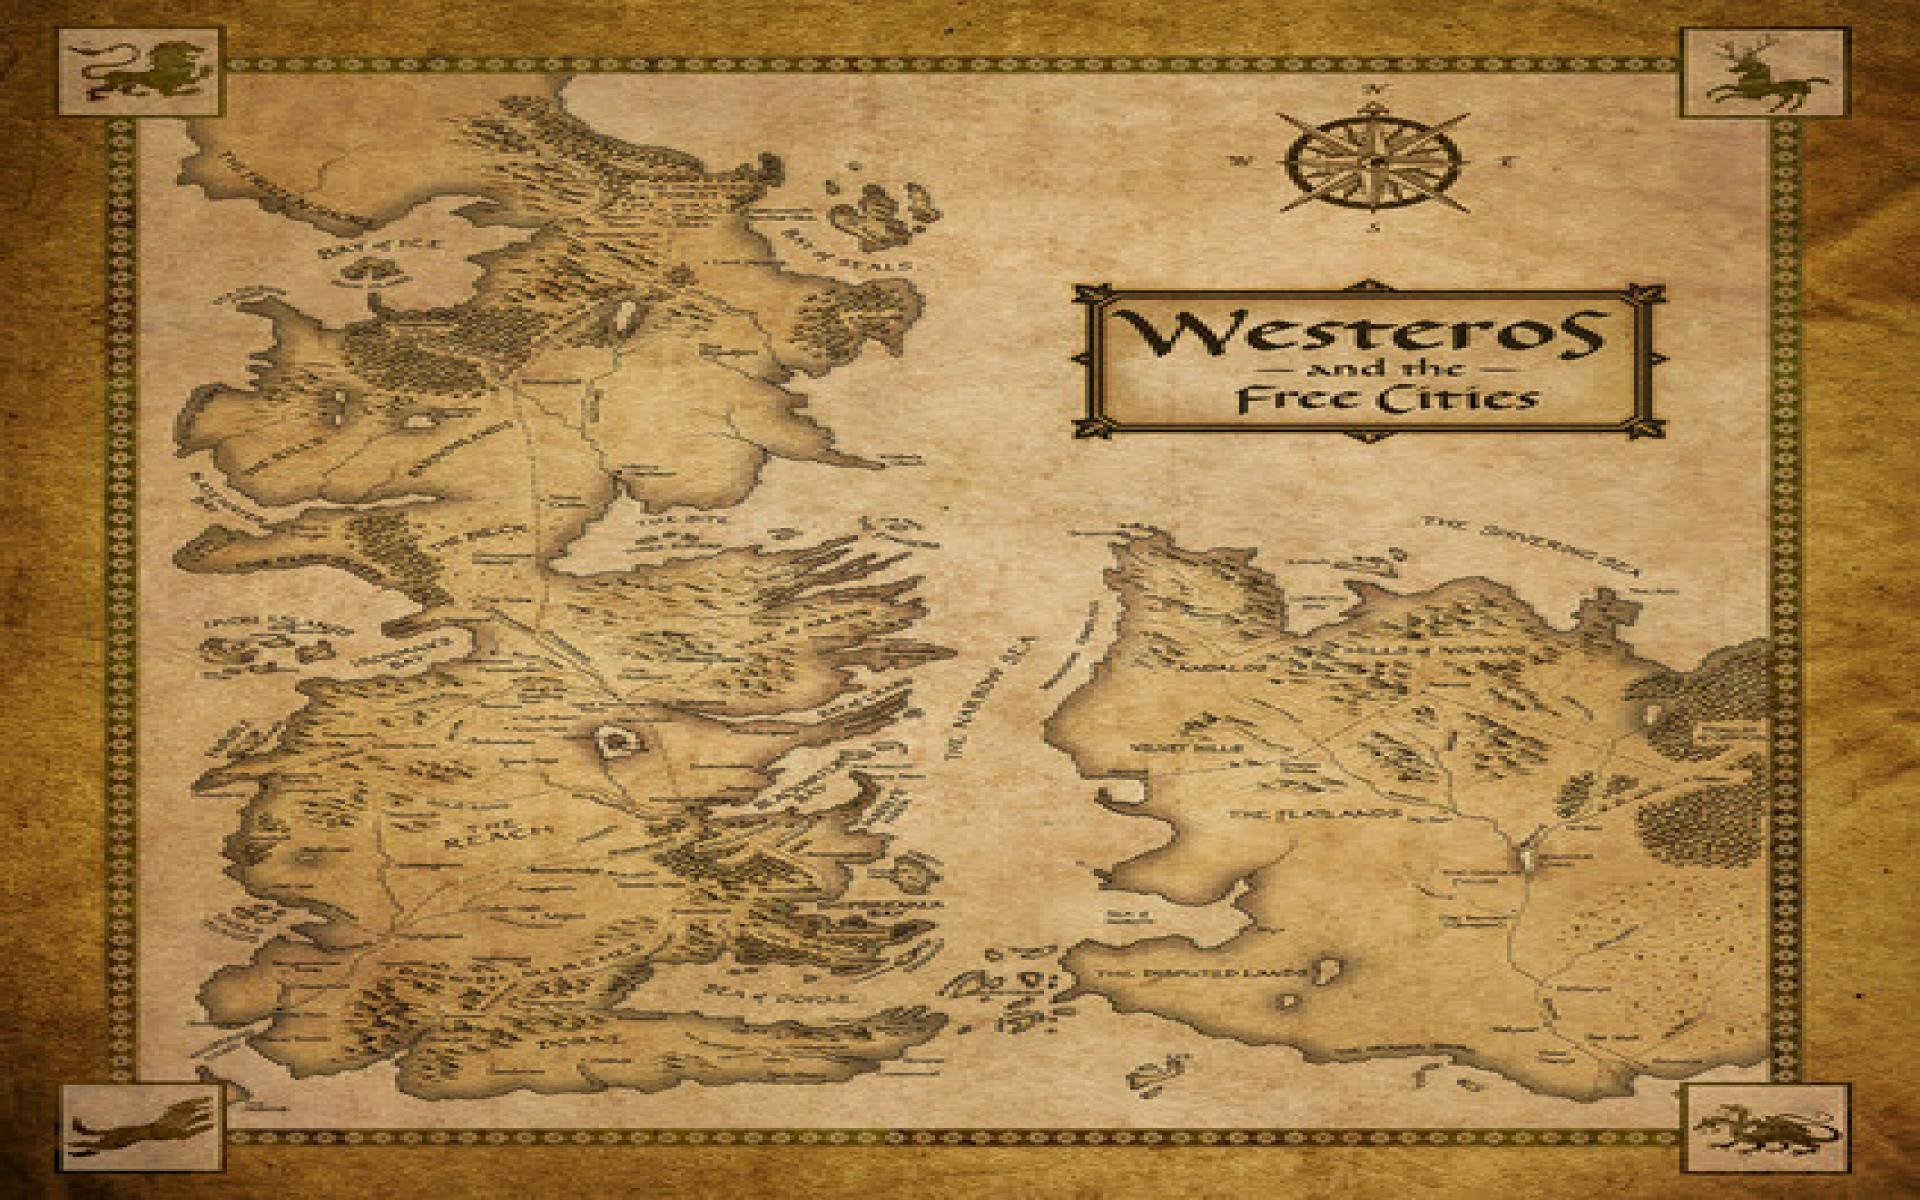 Complete Map Of Game Of Thrones Thrones Map Game Maps Westeros Places